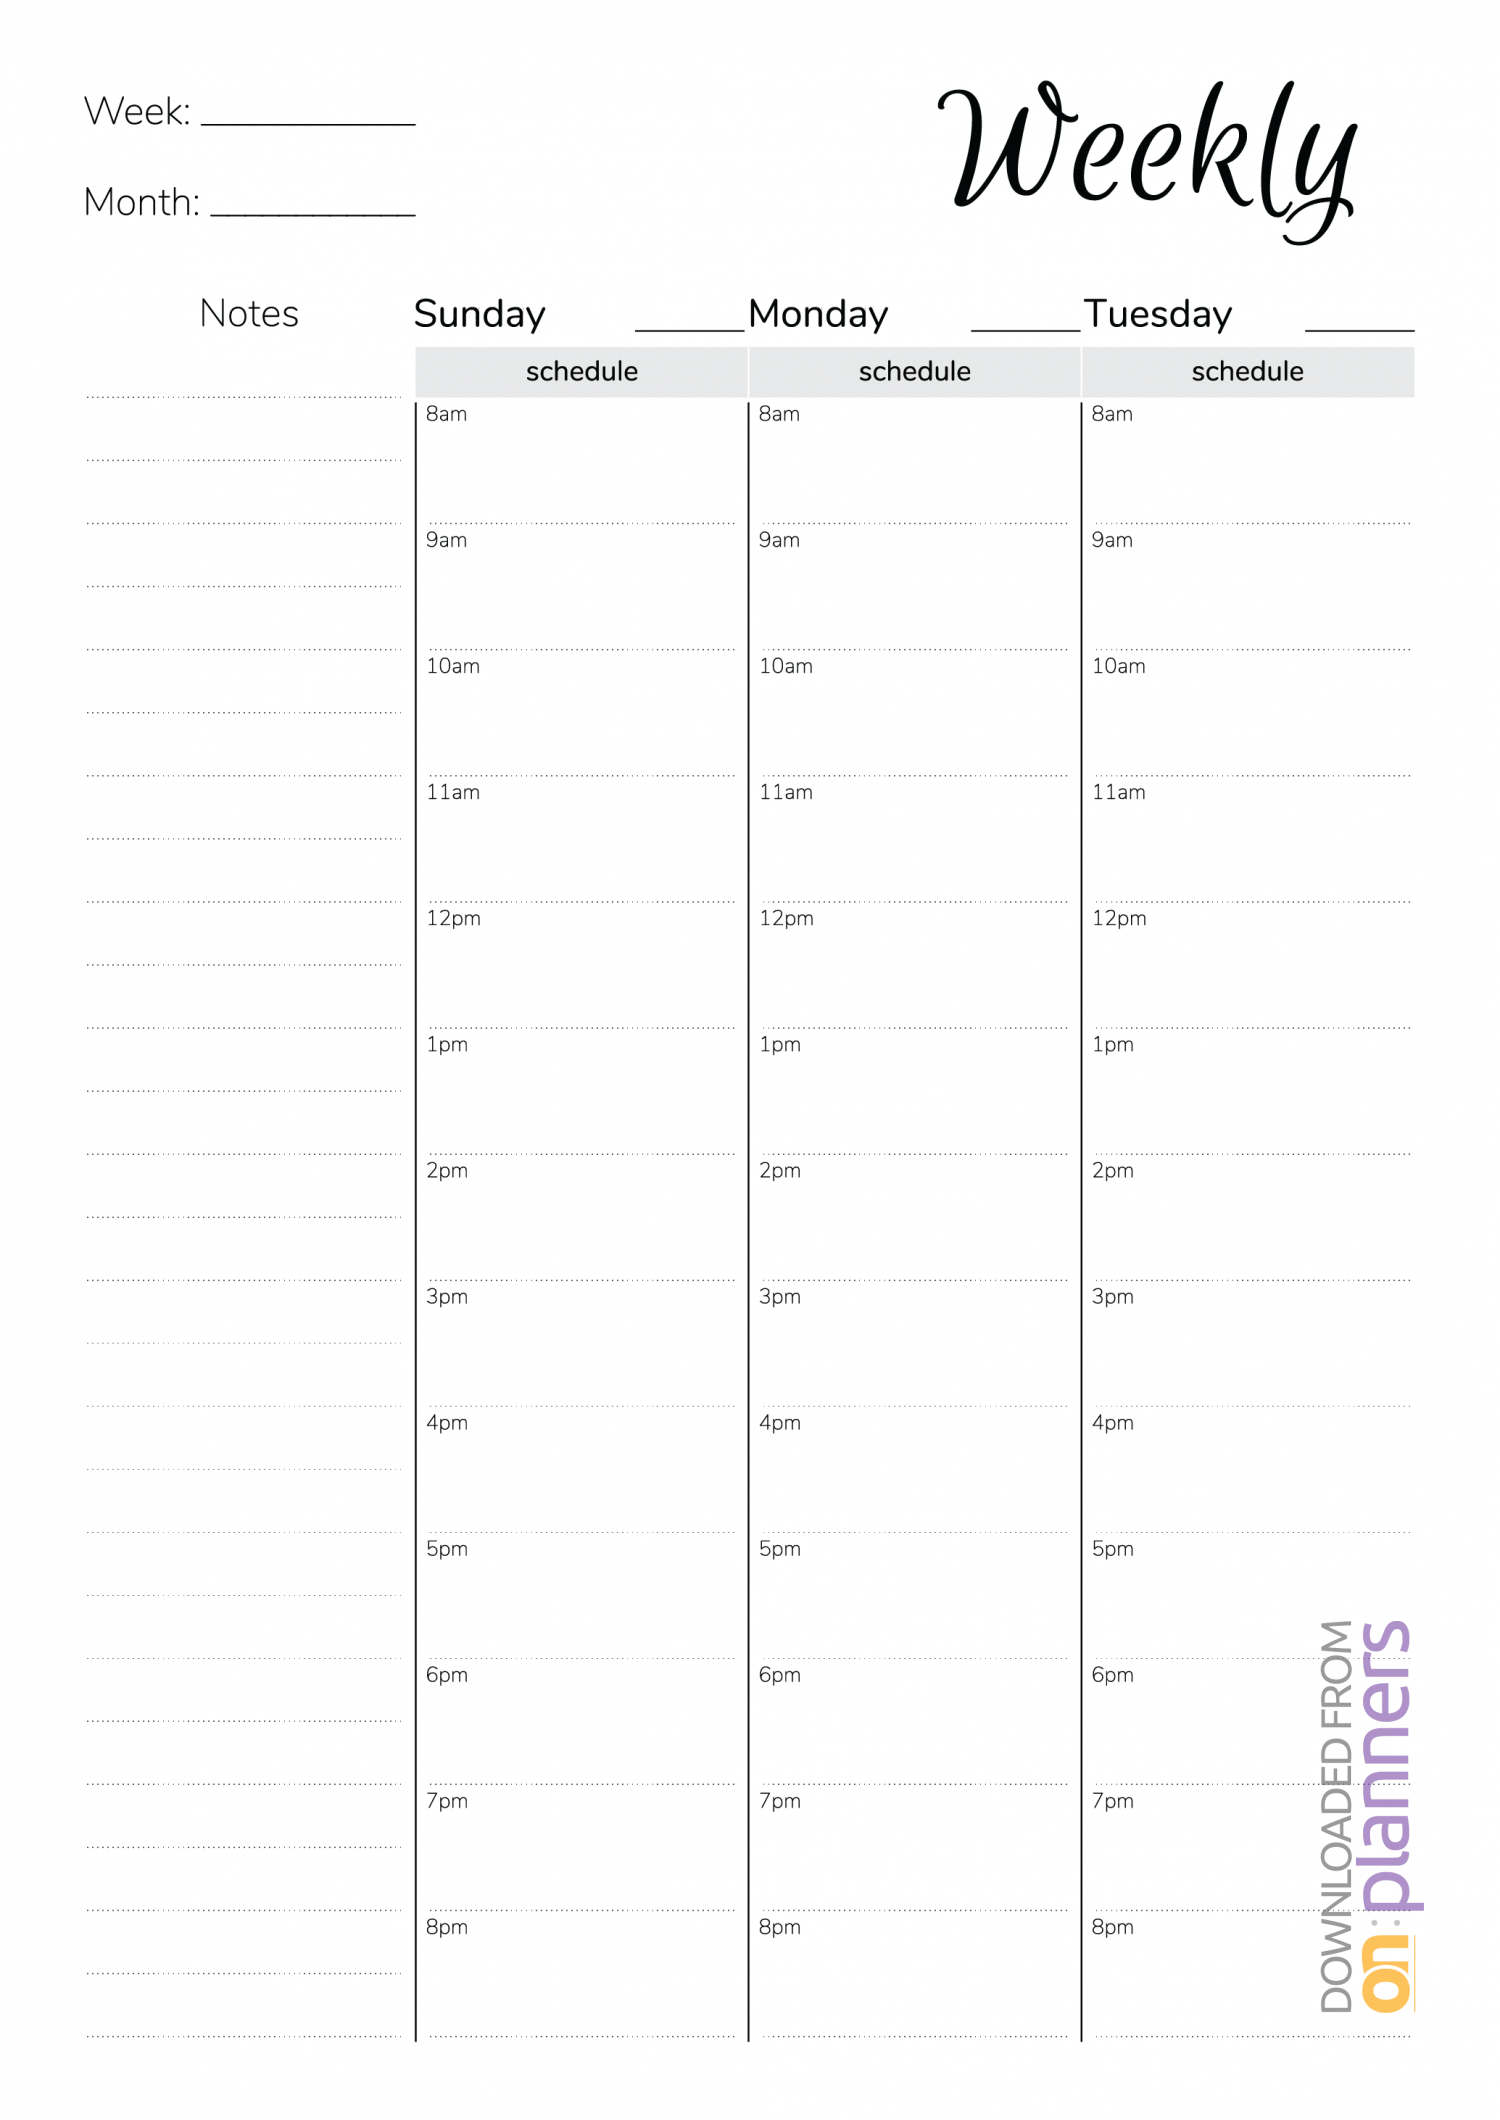 020 Template Ideas Weekly Hourly Schedule Printable Planner within Hourly Calendar Printable